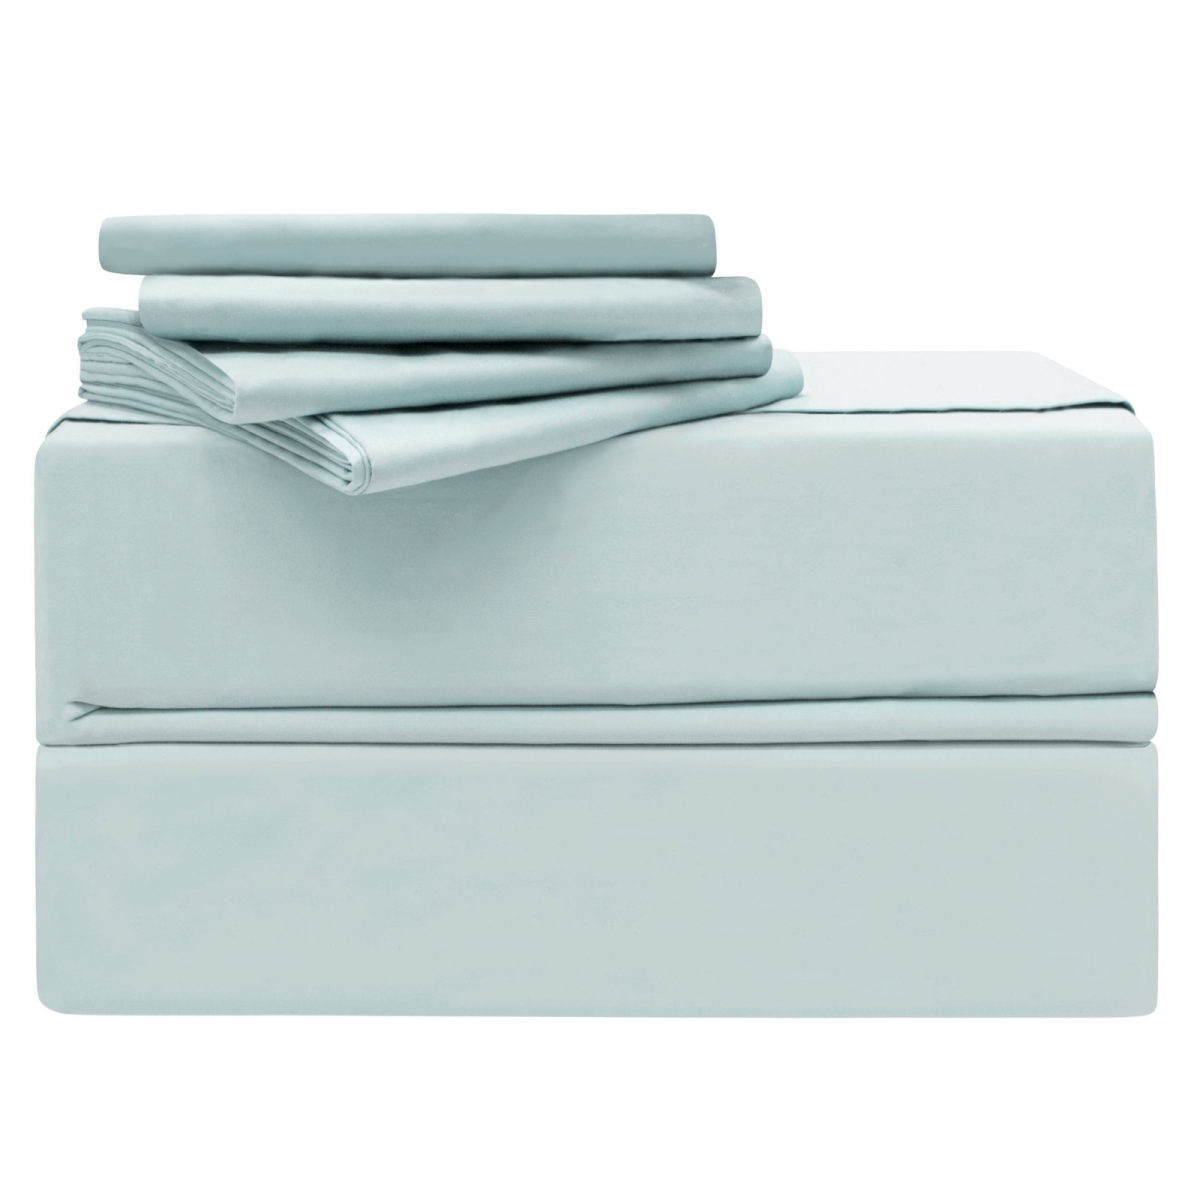 Yms008201 Luxury 620 Thread Count 100 Percent Cotton Sheet Set, Spa Blue - King - 6 Piece